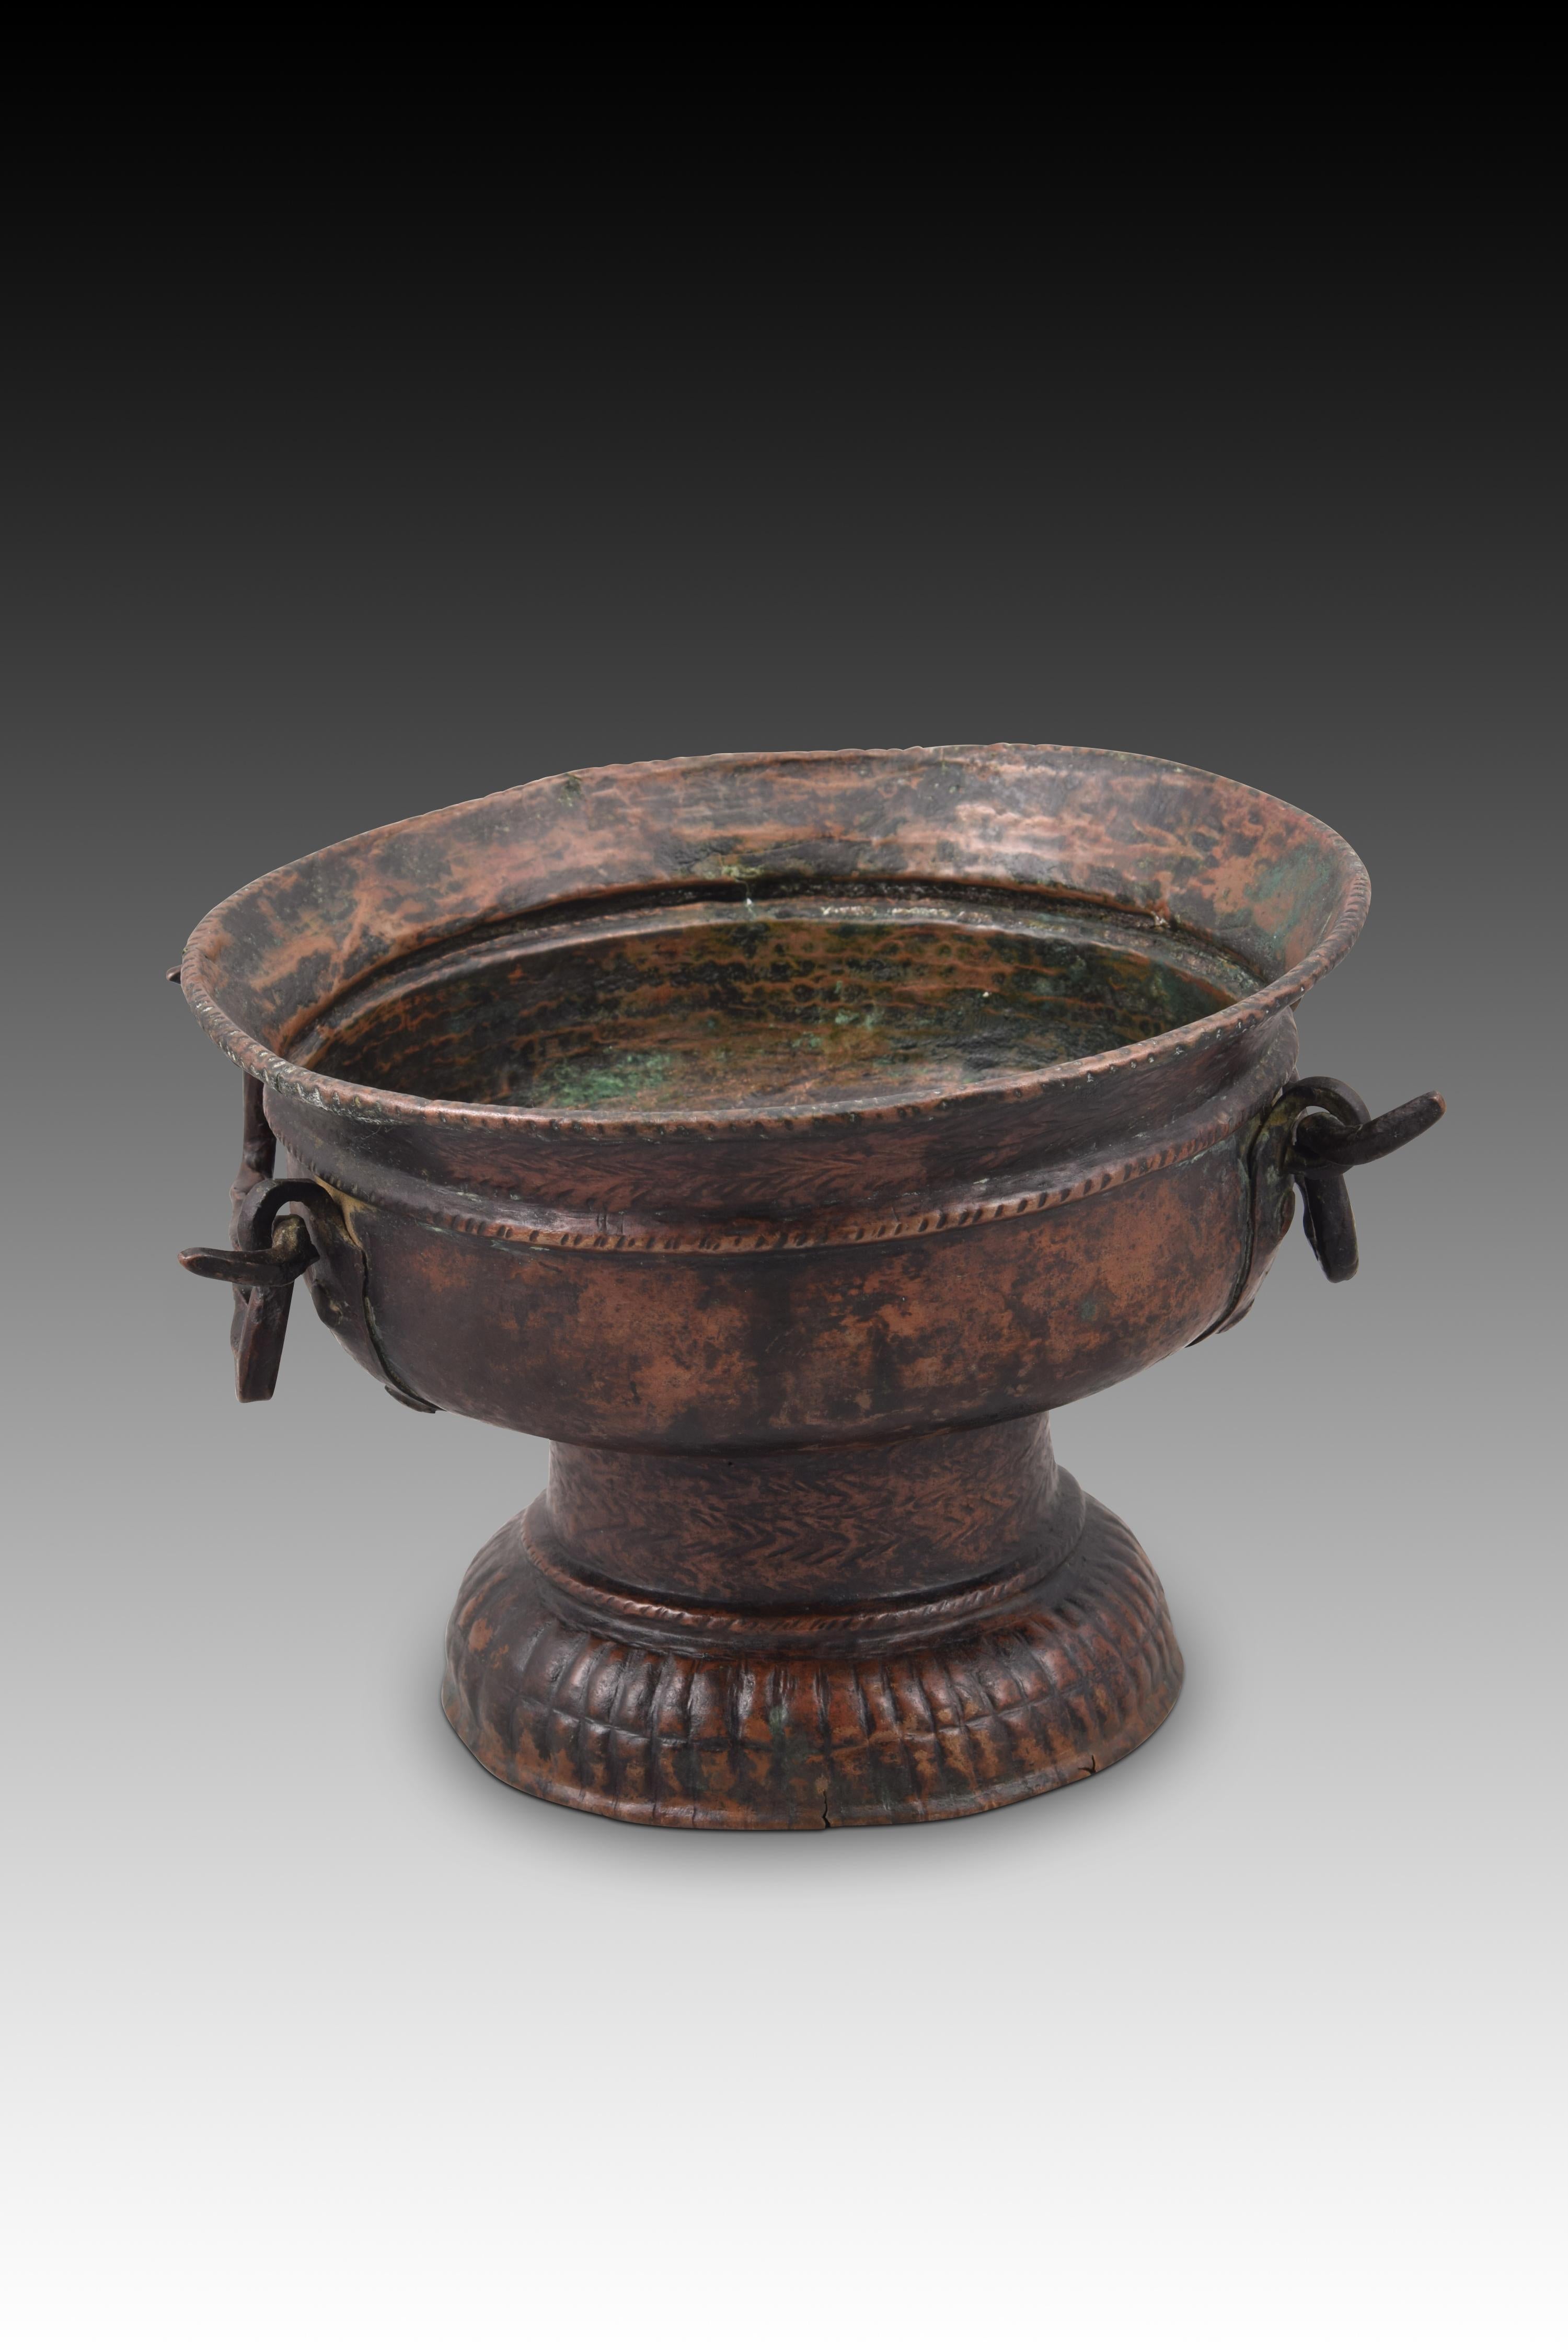 Brazier. Copper. Possibly Castile, 16th century. 
Brazier made of copper with a circular foot decorated with vertical bands, a low tubular shaft enhanced with a fine roped molding and a semicircular body, with a wide mouth that flares outwards, and